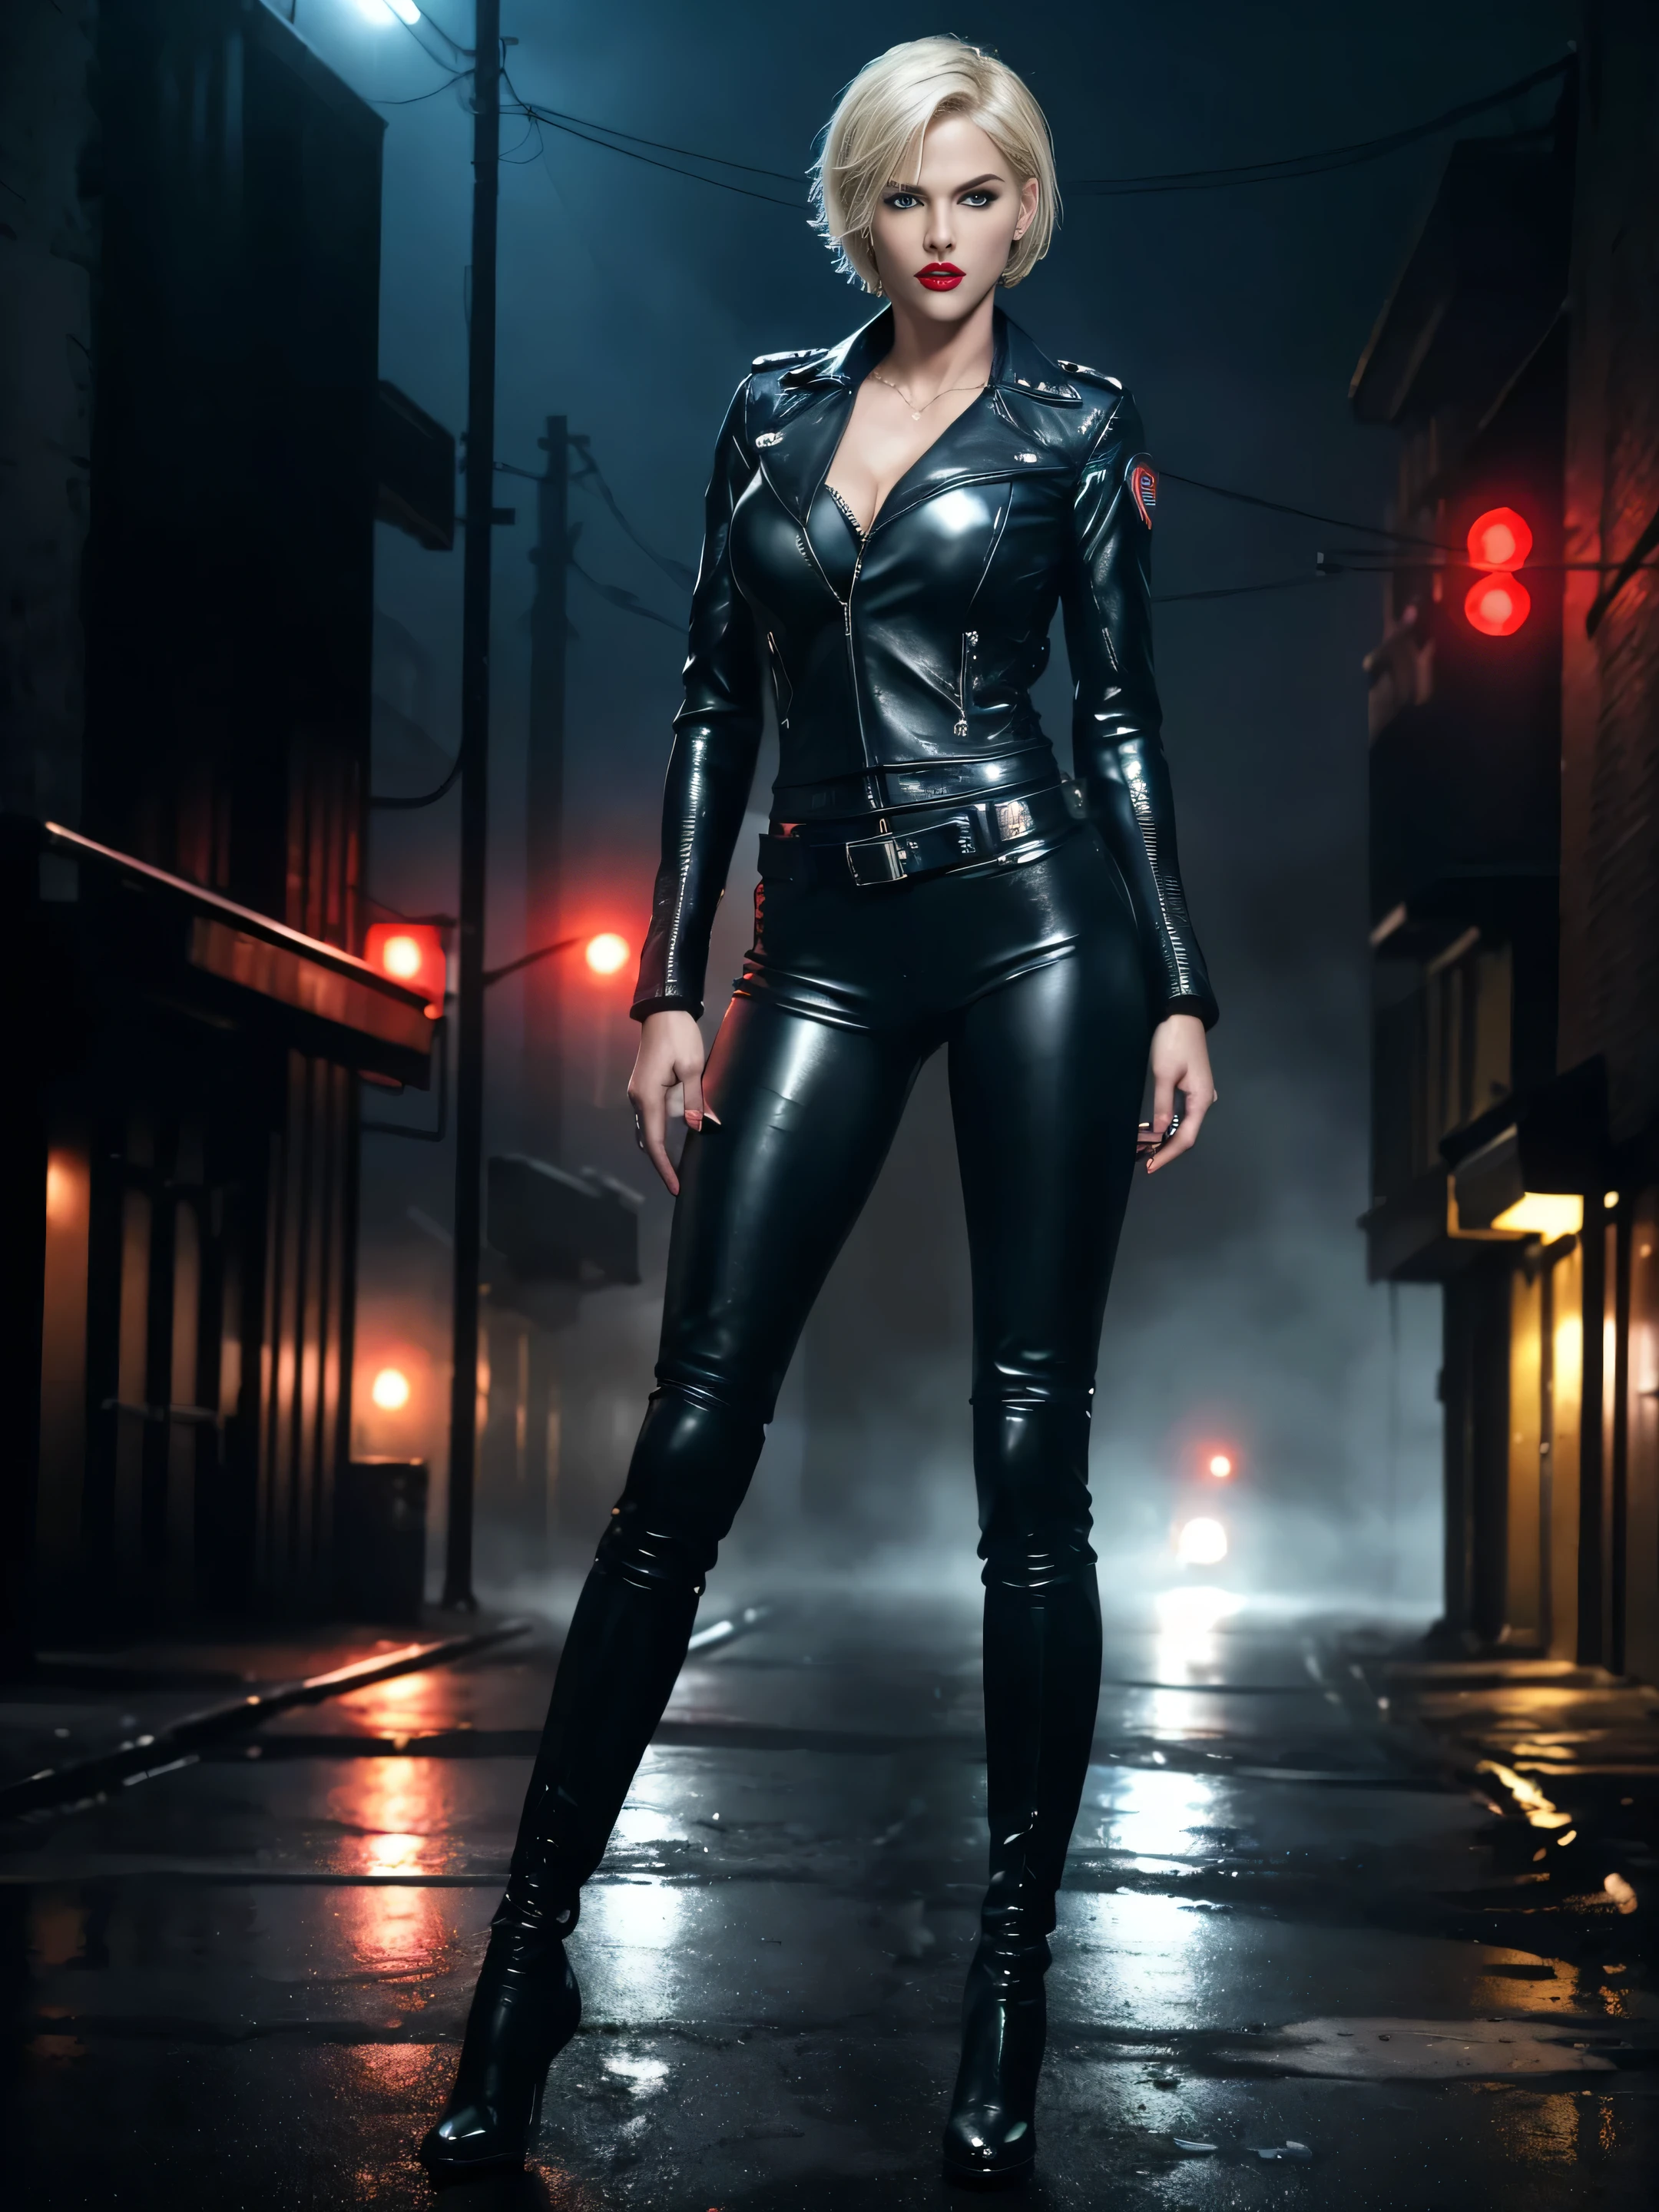 full length young beauty sexy policewoman, blonde short hair, blue eyes, red lips, scowling expression, piercing gaze, wearing tight leather pants, tight leather jacket, leather boots, standing in a deserted post-apocalyptic small town street at night in the fog, faded dark colors